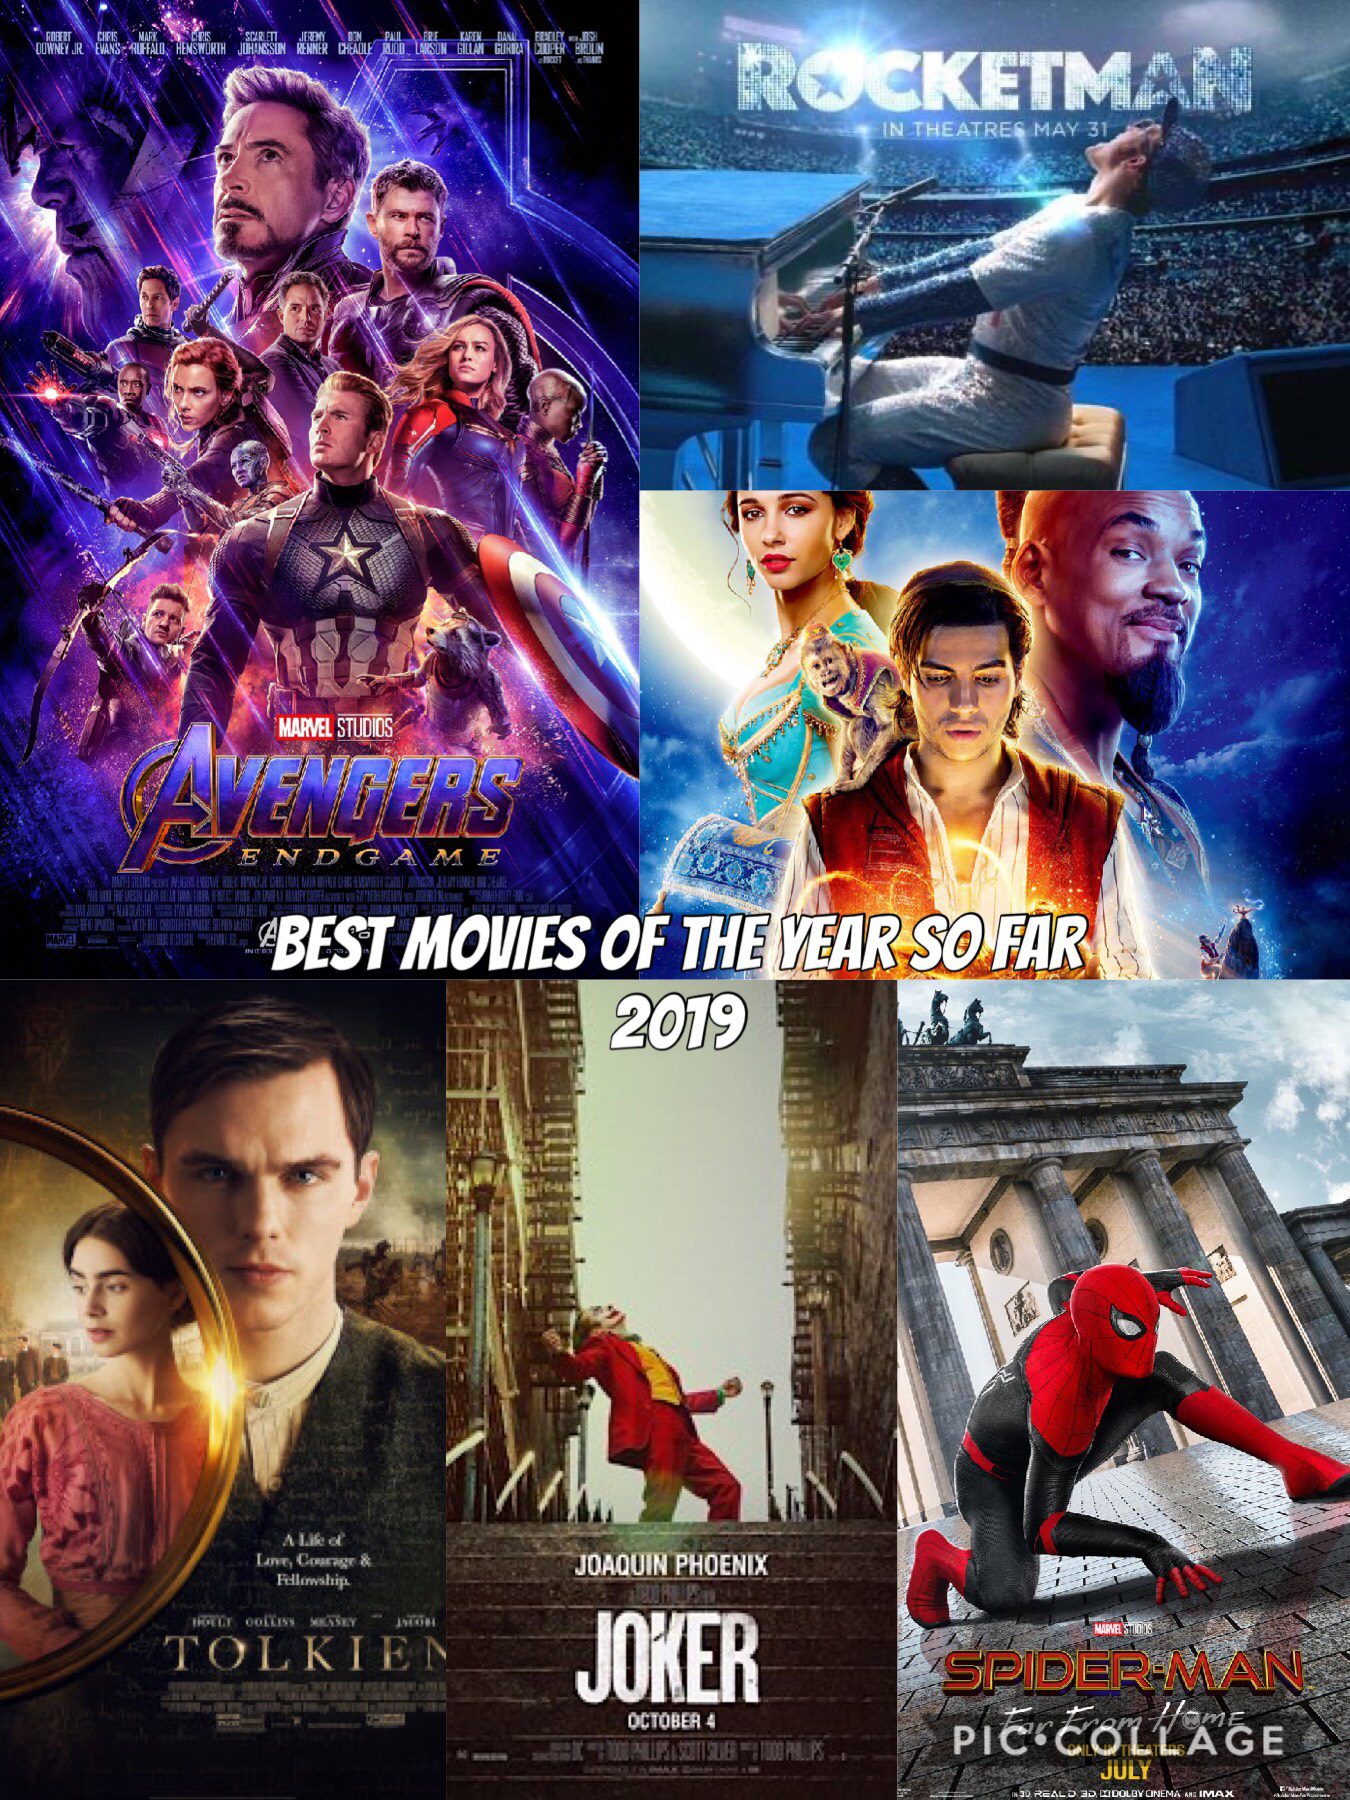 Best movies of the year so far 